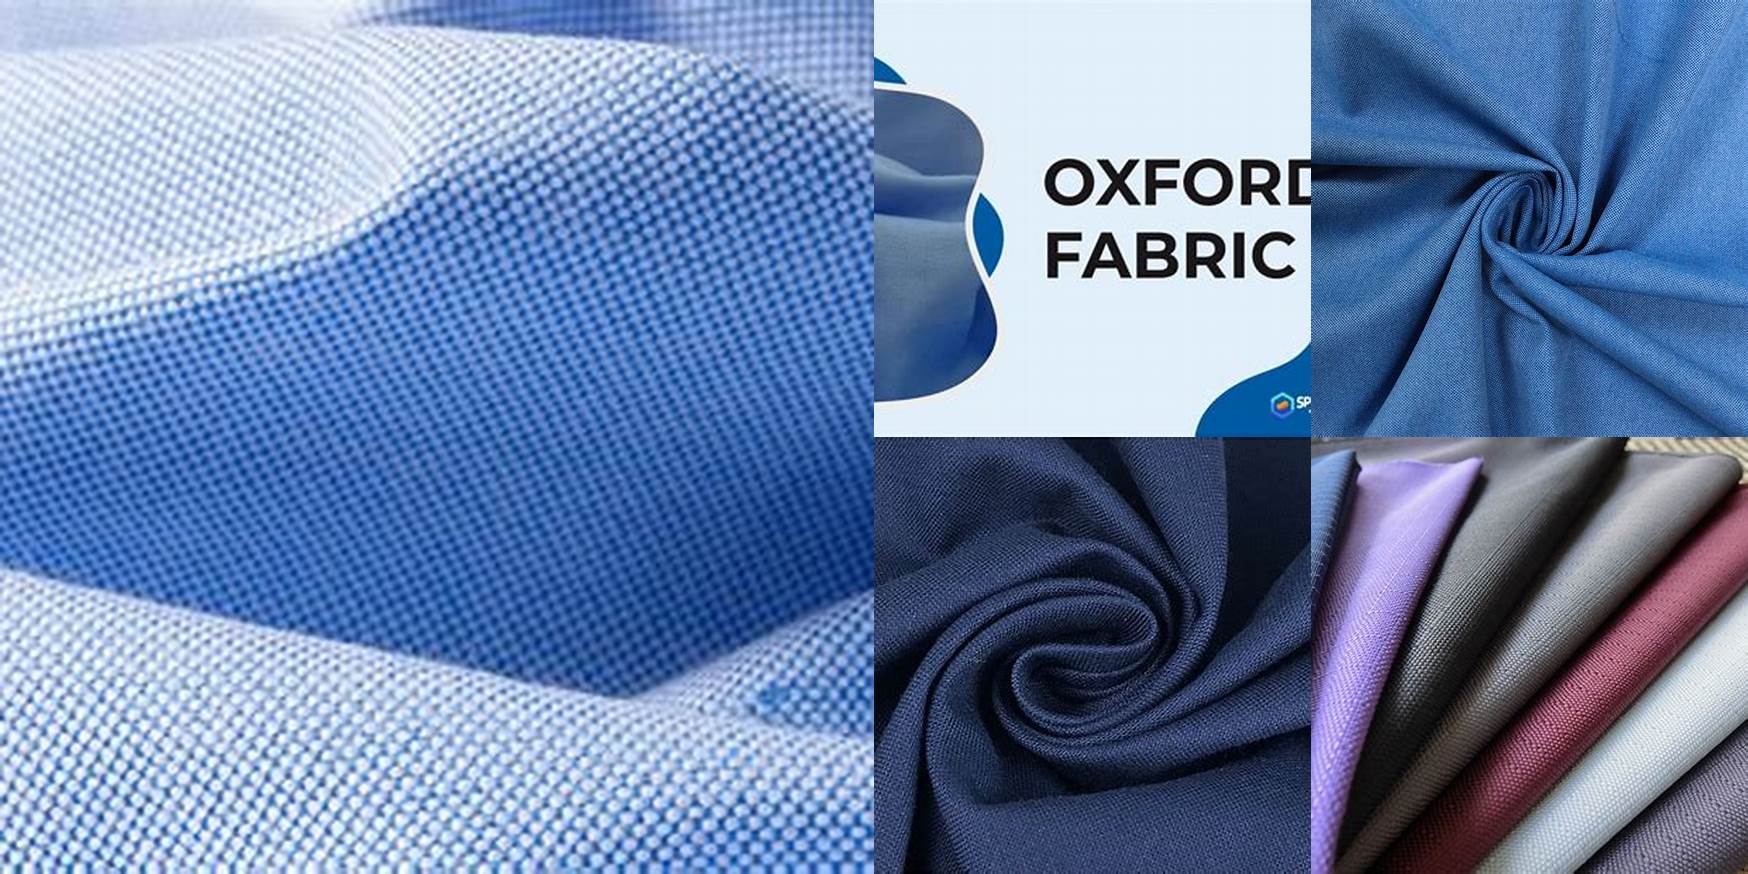 What Is Oxford Fabric Made Of